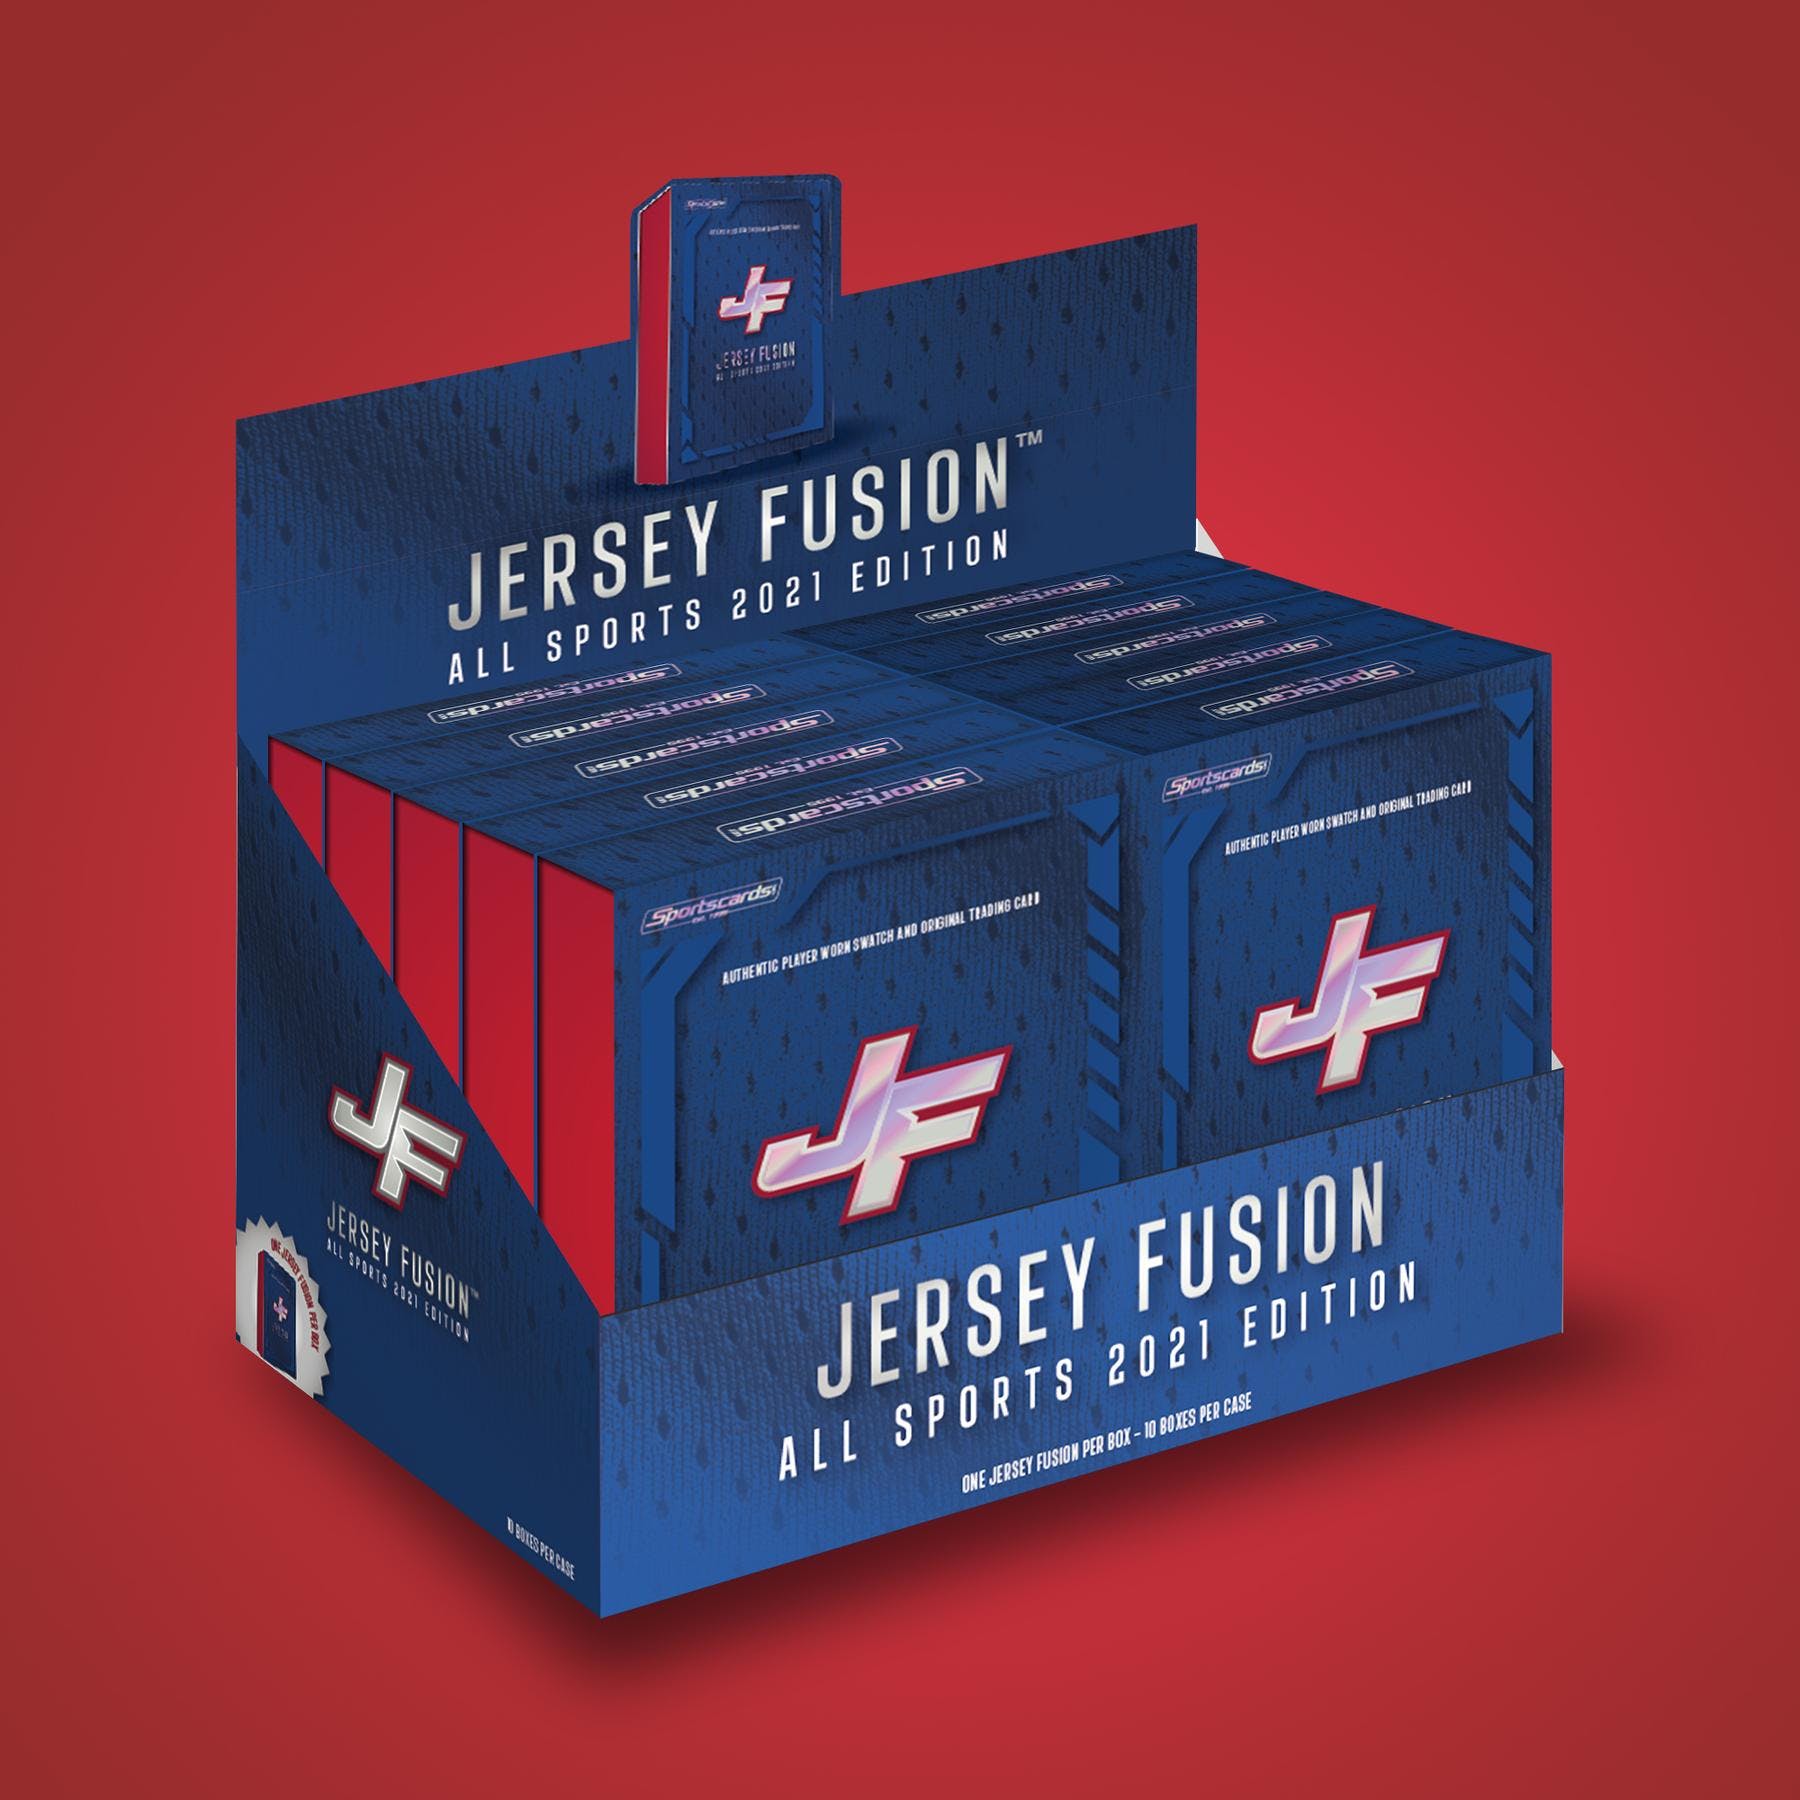 2021 JERSEY FUSION ALL SPORTS EDITION DISPLAY CASE - 10 JERSEY FUSIONS PER CASE